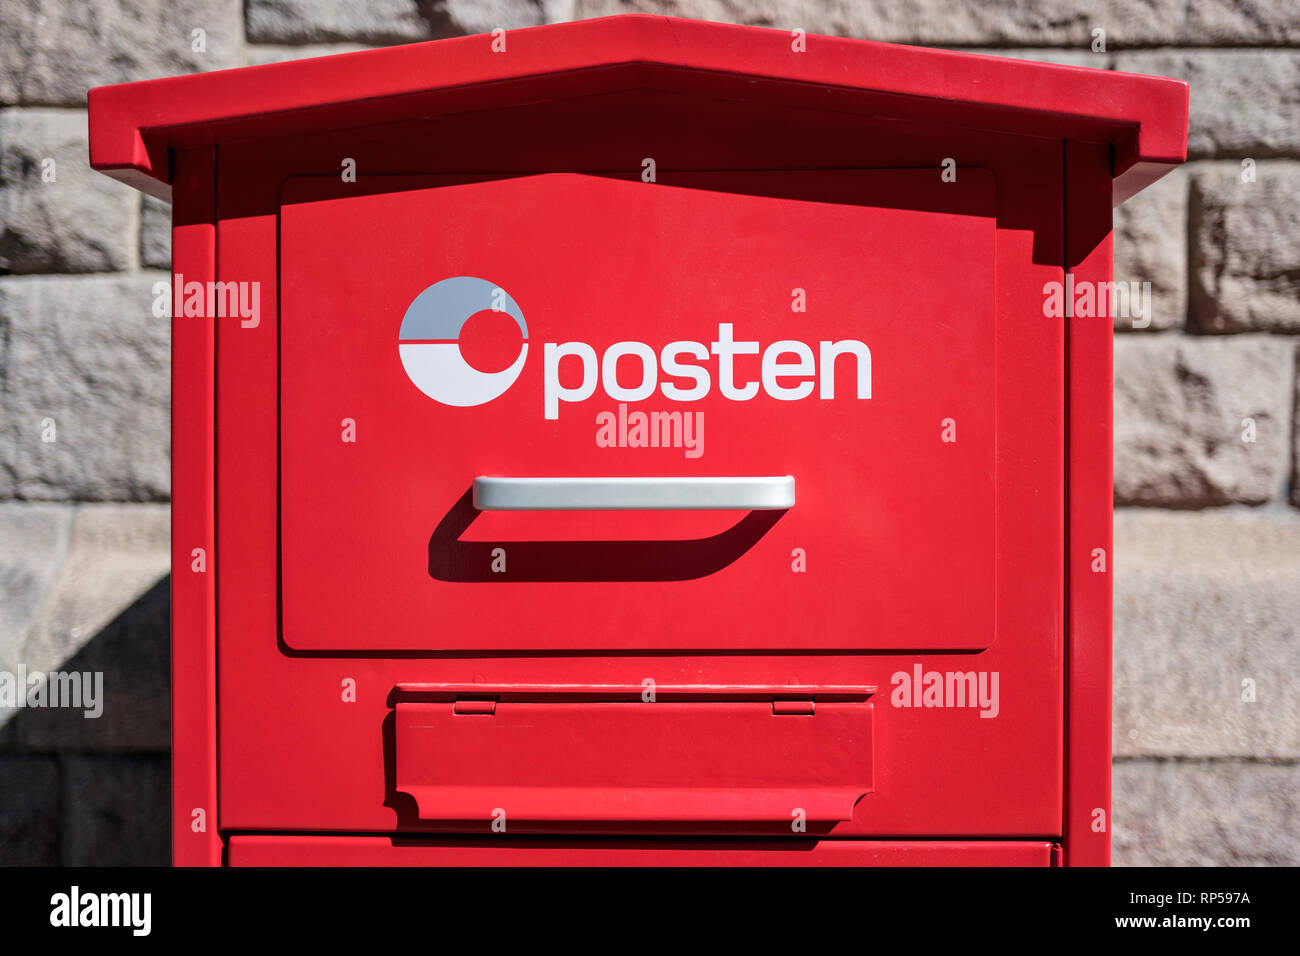 Posten Mailbox. Posten Norge is the Norwegian postal service. The company is owned by the Norwegian Ministry of Transport and Communications. Stock Photo